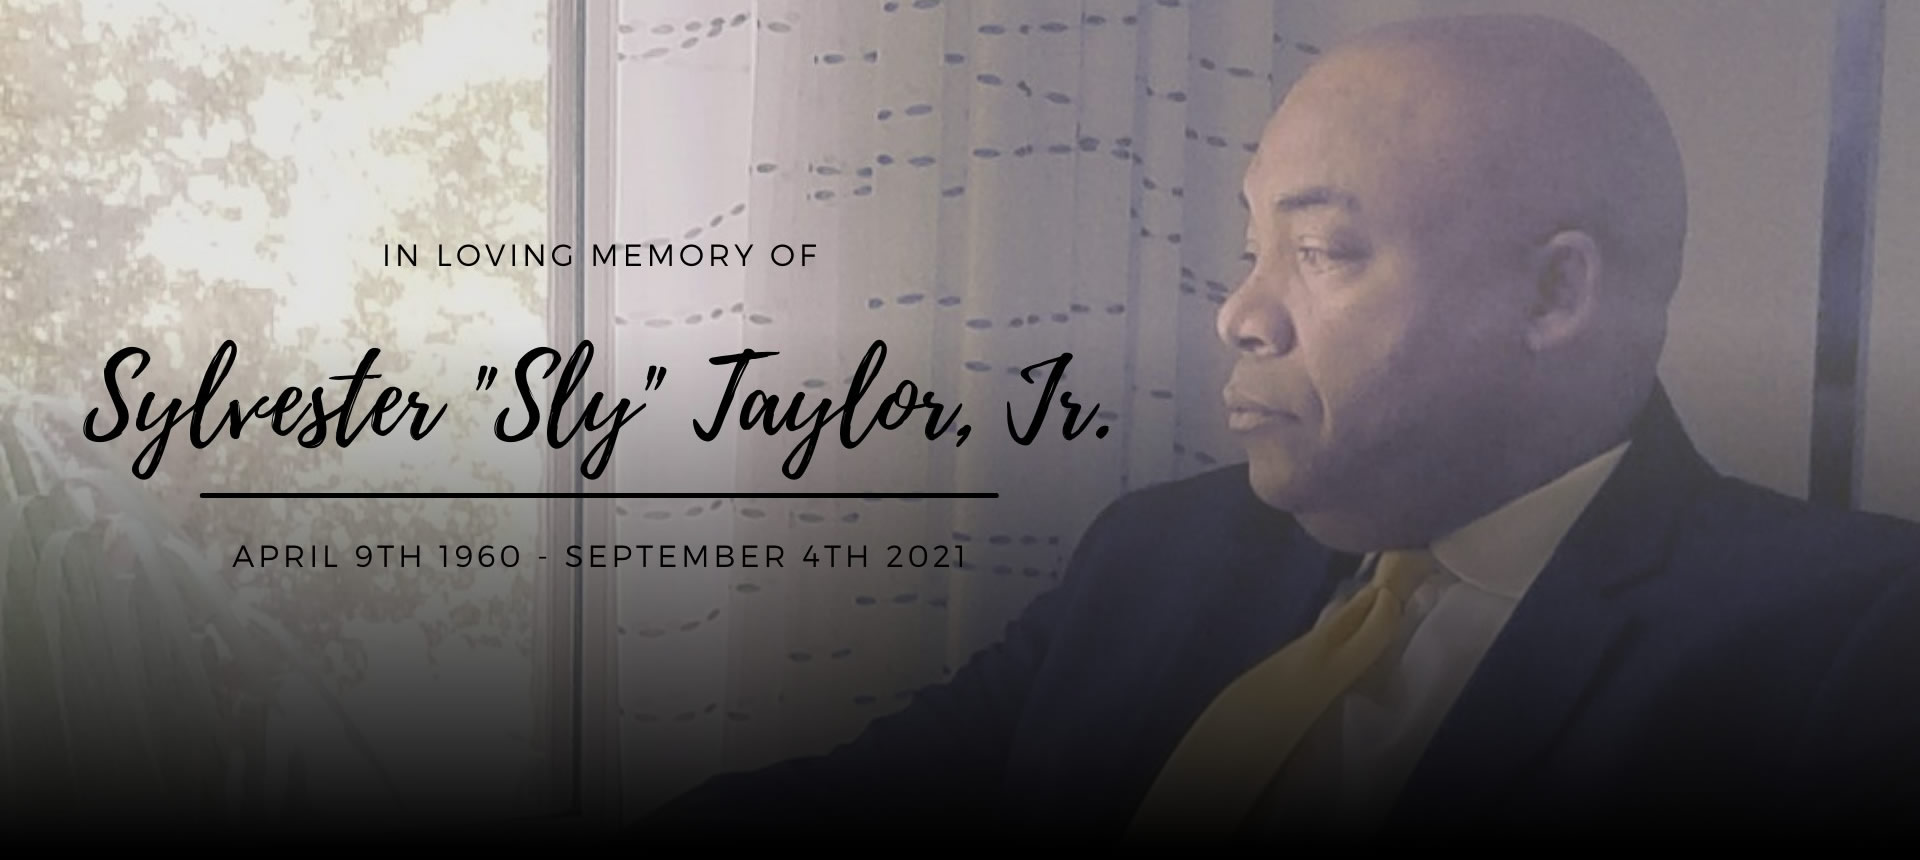 Brother Sylvester “Sly” Taylor